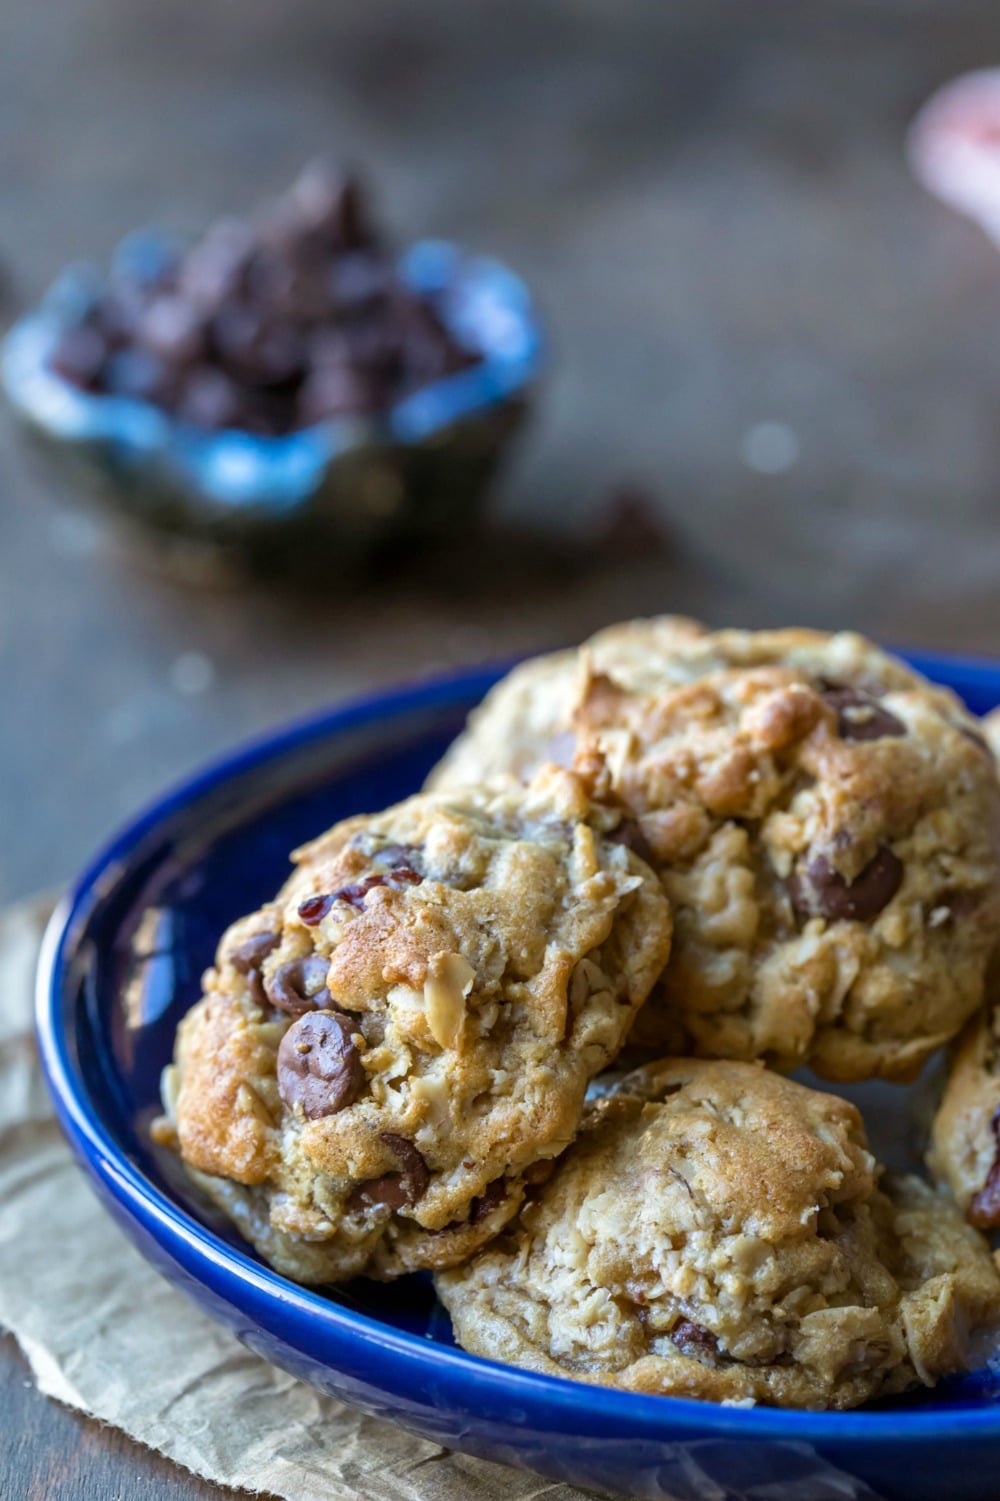 Easy chocolate chip oatmeal cookies on a blue plate next to a dish of chocolate chips